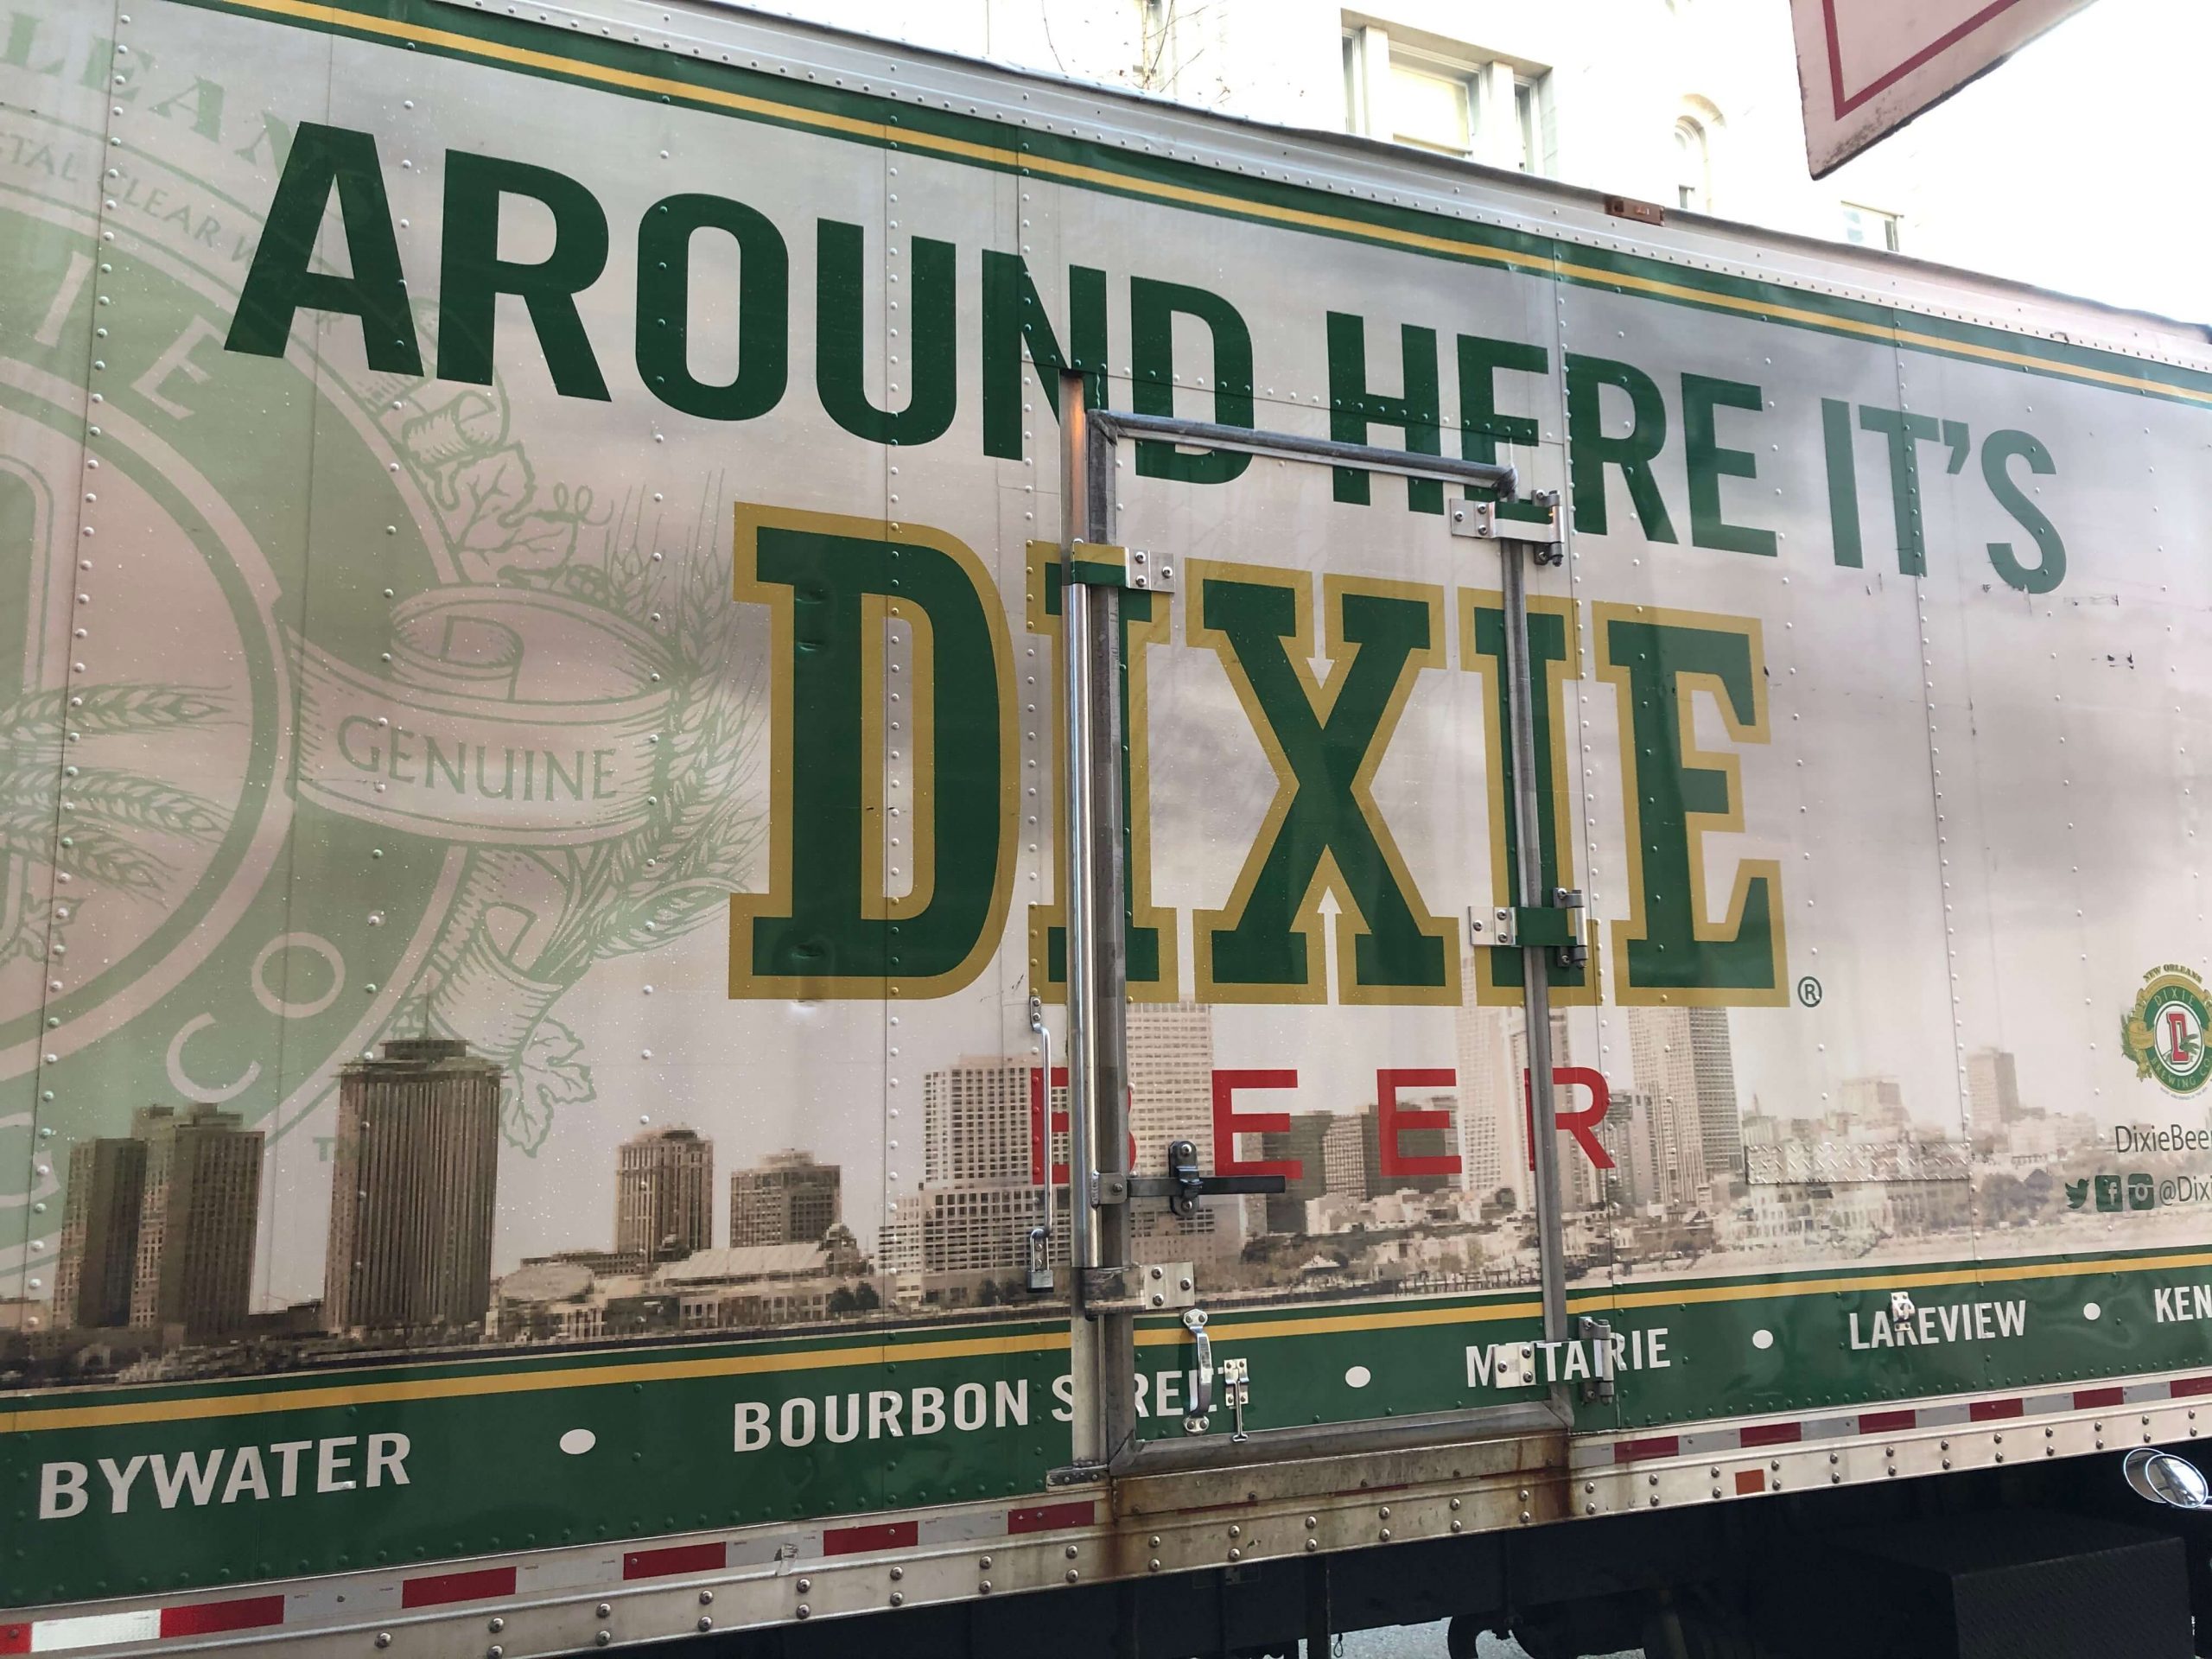 Everybody in New Orleans Loves Dixie Beer.